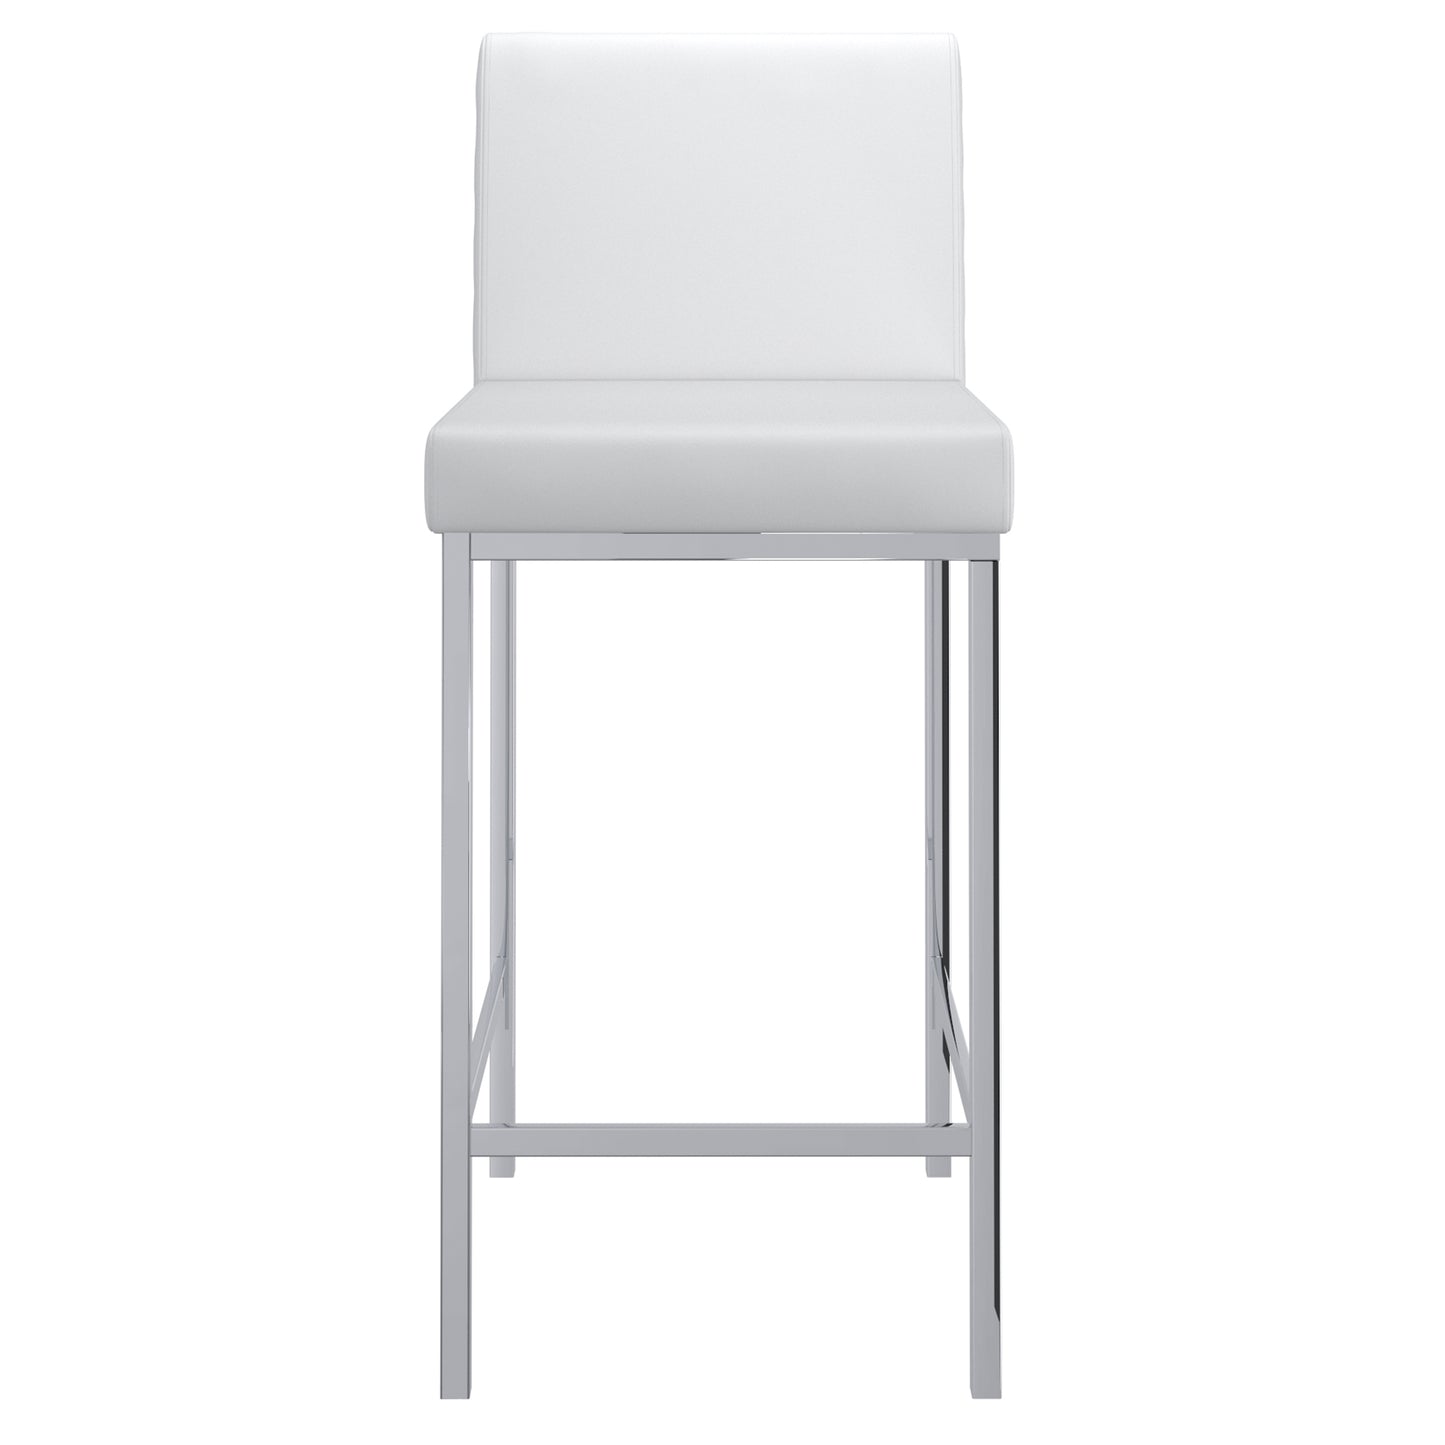 (PORTO WHITE- 2 PACK) - LEATHER COUNTER STOOLS- OUT OF STOCK UNTIL JUNE 30, 2023